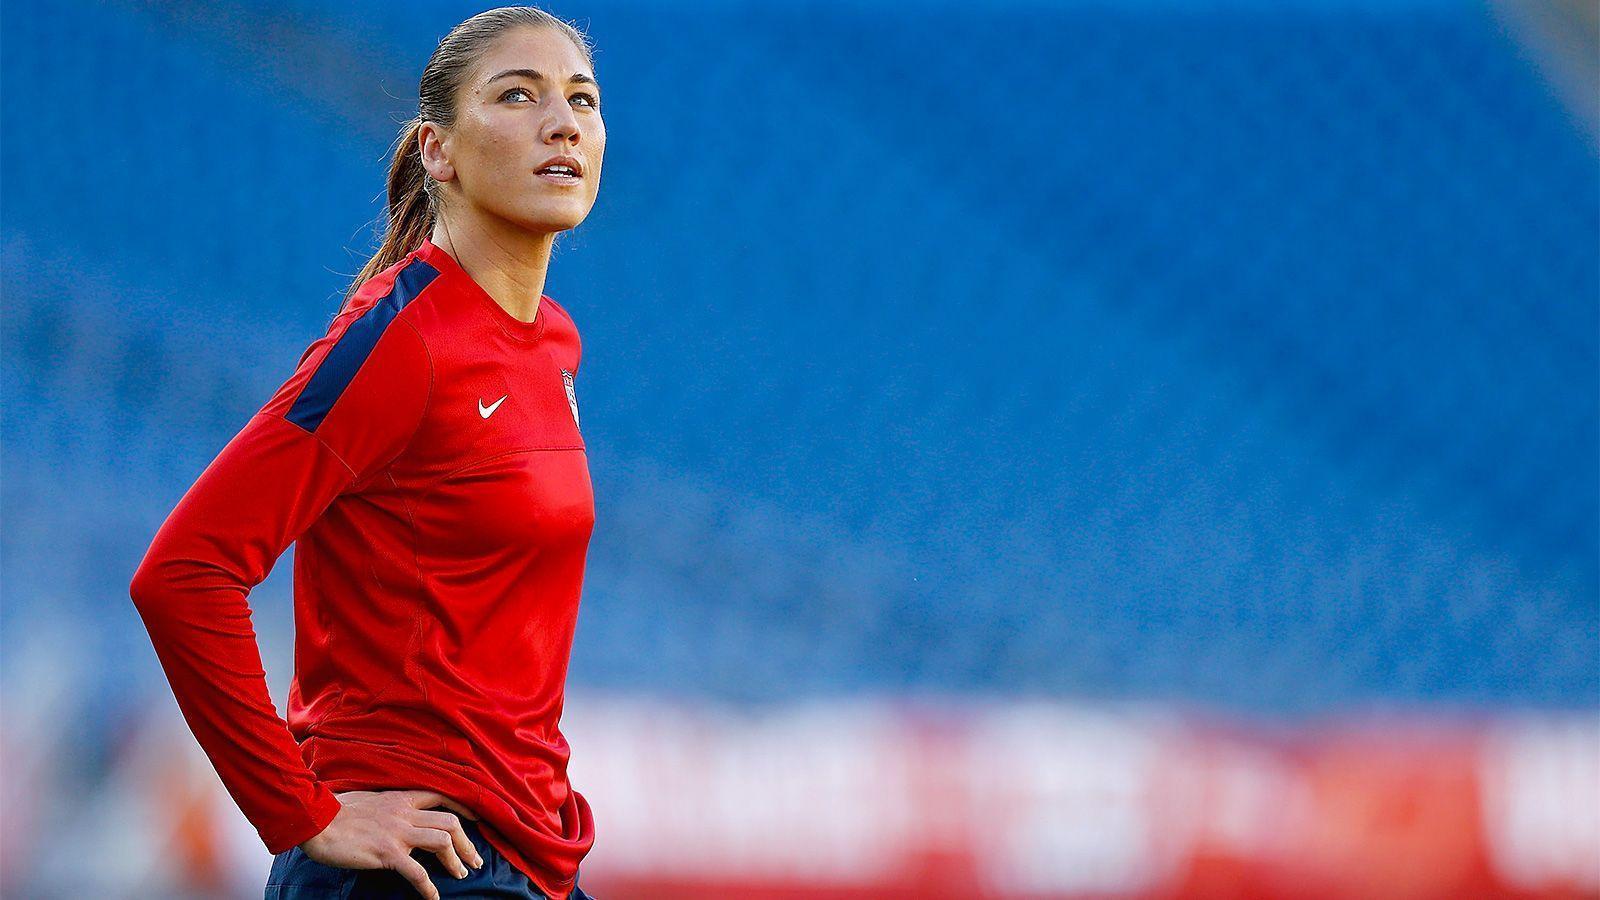 Hope Solo Wallpaper, Get Free top quality Hope Solo Wallpaper